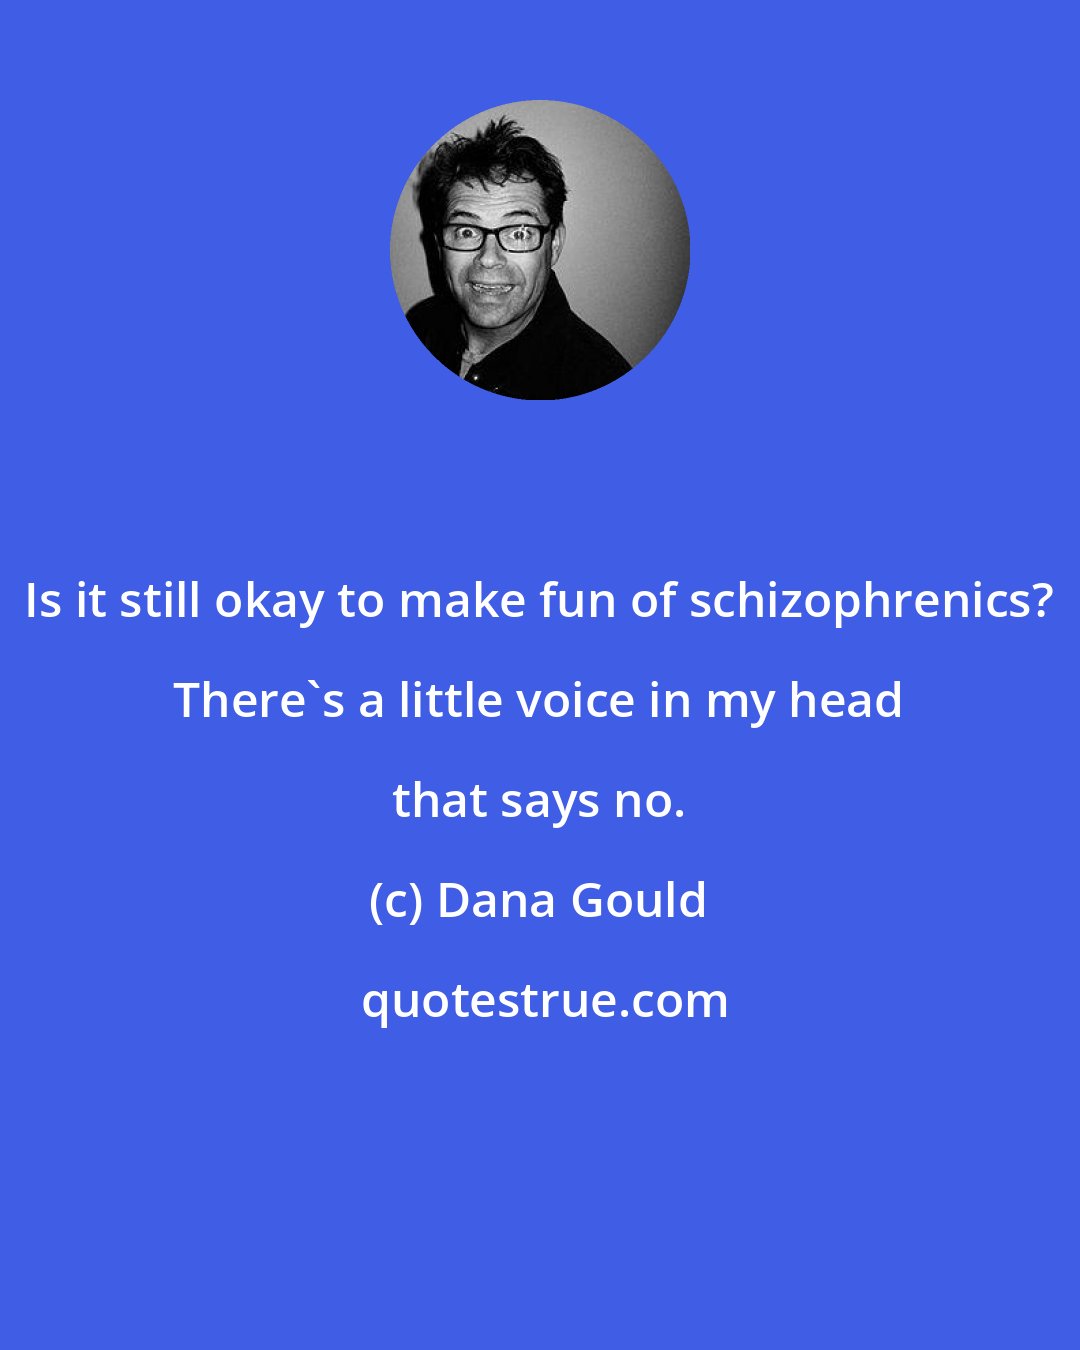 Dana Gould: Is it still okay to make fun of schizophrenics? There's a little voice in my head that says no.